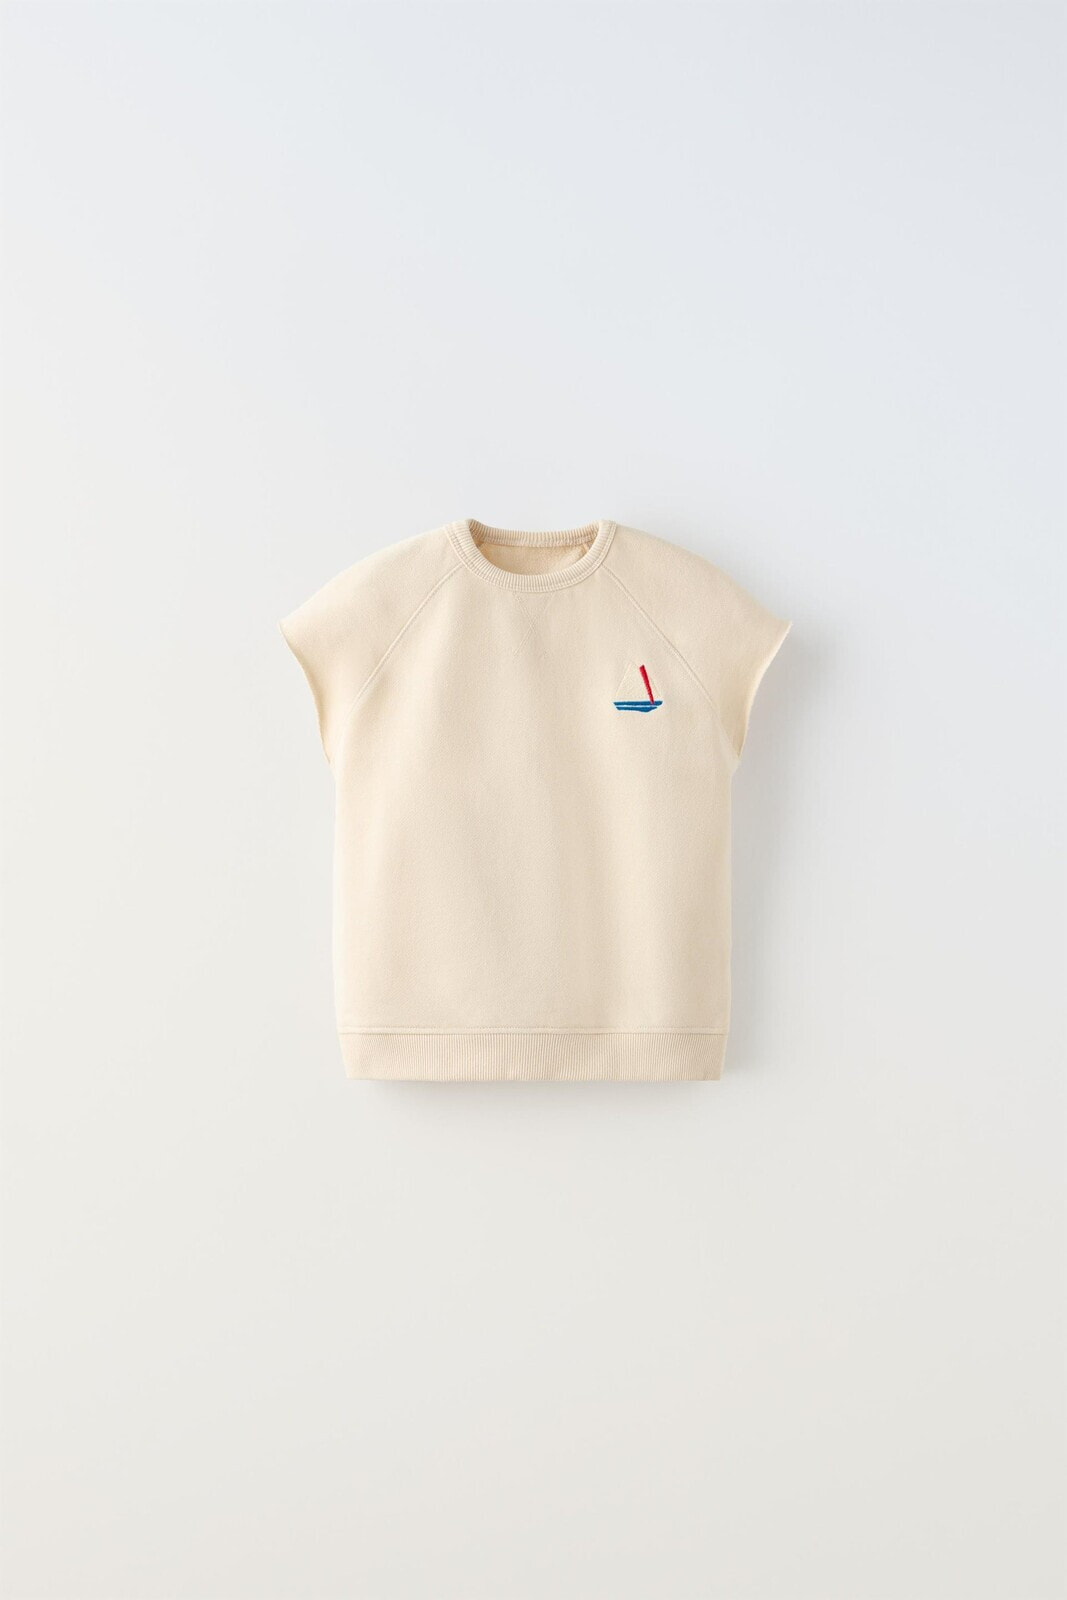 Embroidered boat top